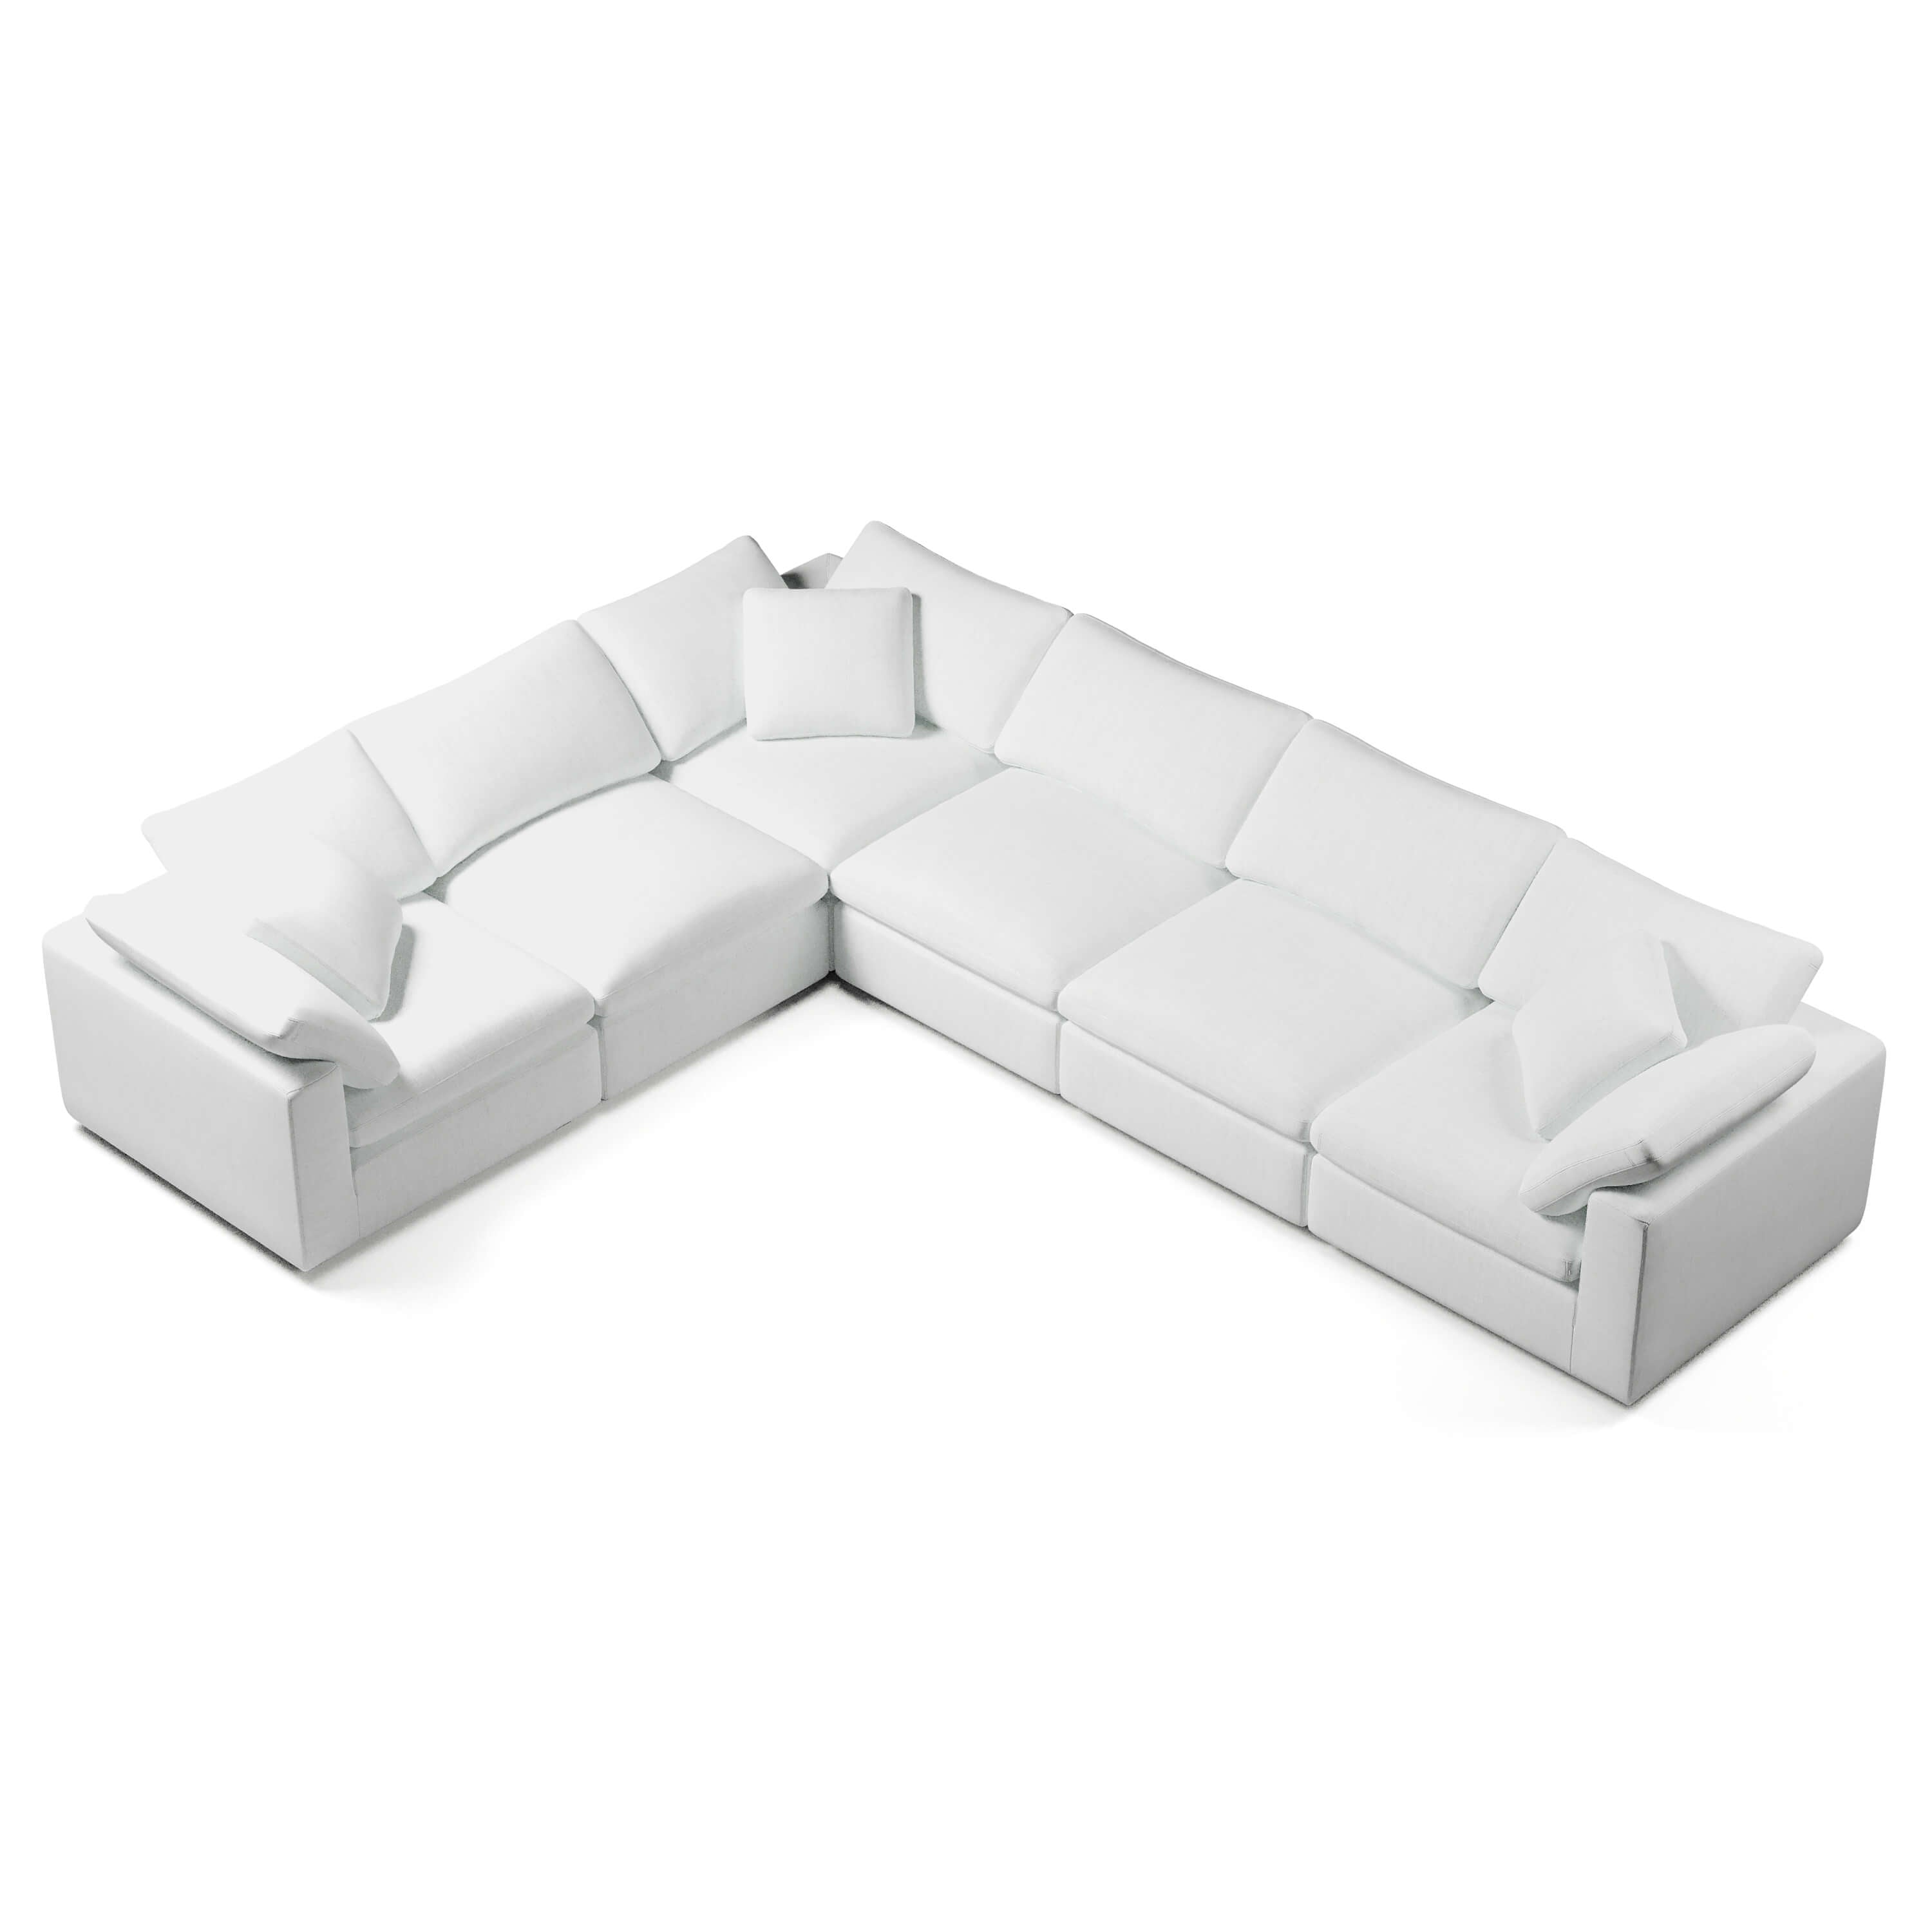 L-Sectional Modular Sofa | L-Sectional Sofa | Couch Haus